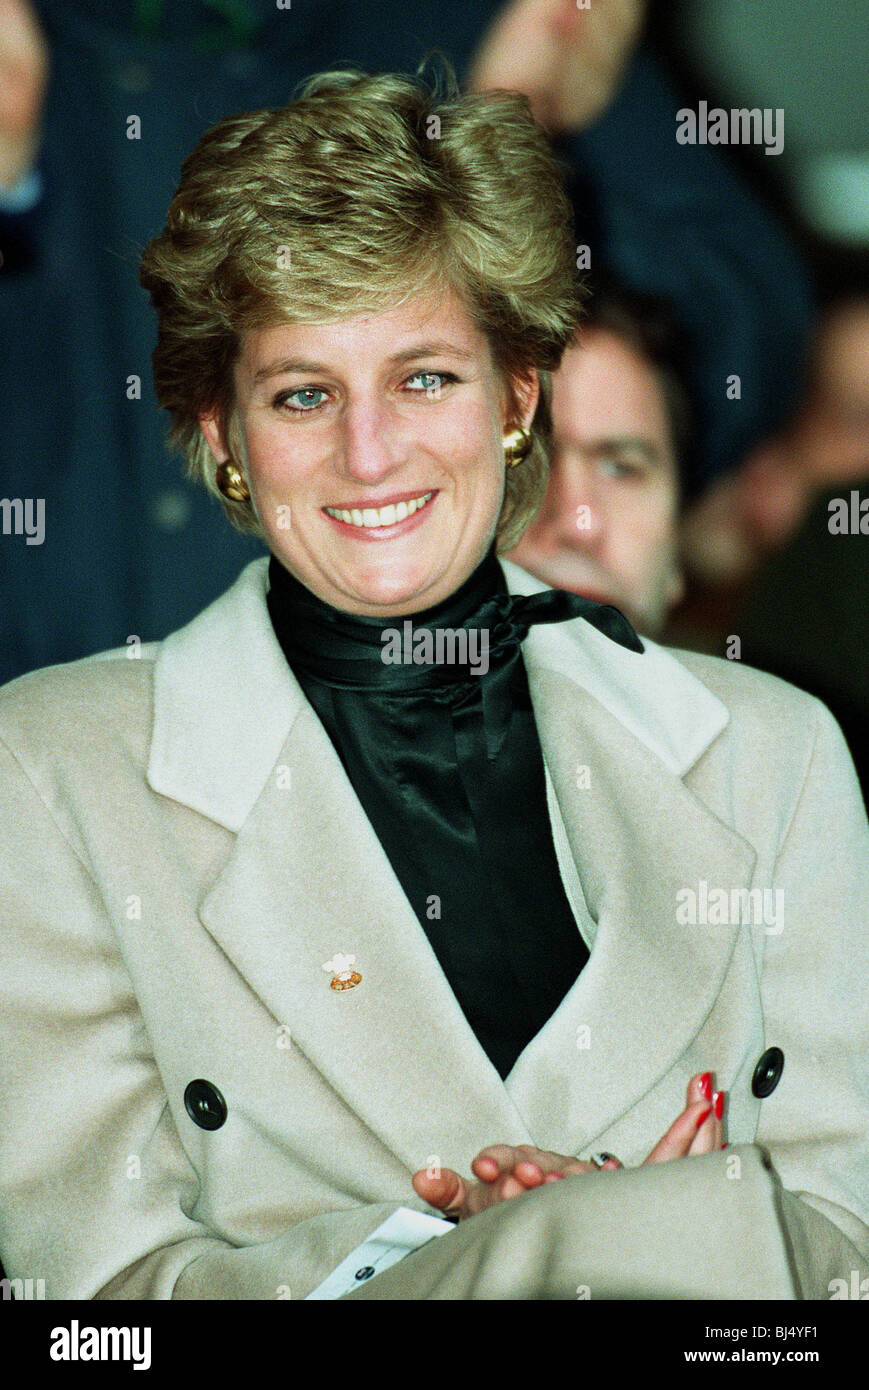 PRINCESS DIANA ATTENDING THE FRANCE V WALES RUGBY IN PARIS 21 January ...